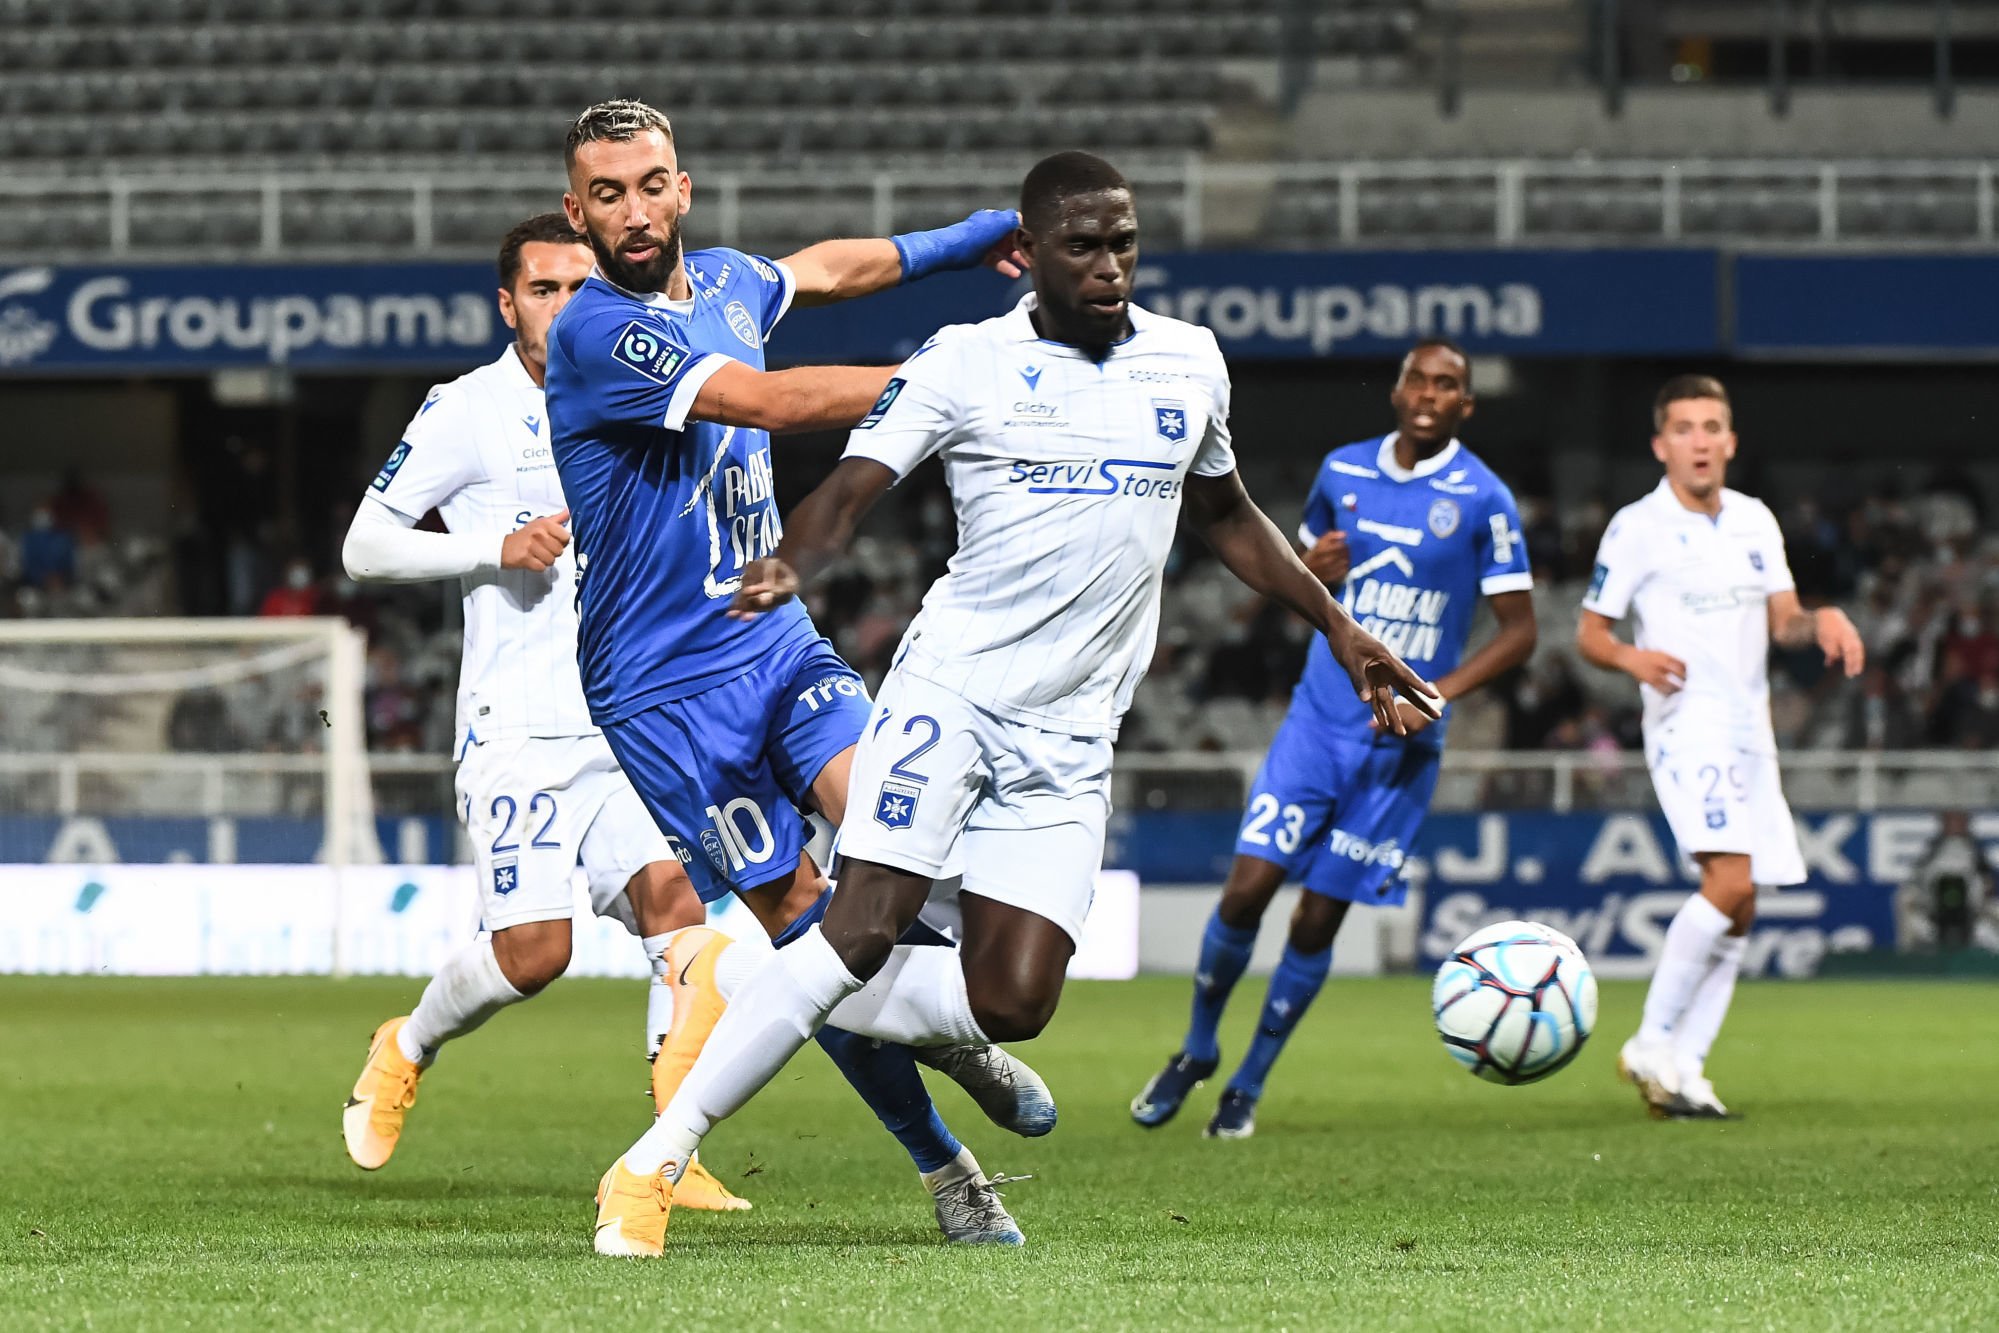 Florian TARDIEU of Troyes and Carlens ARCUS of Auxerre during the French Ligue 2 Soccer match between Auxerre and Troyes at Stade Abbe Deschamps on September 21, 2020 in Auxerre, France. (Photo by Baptiste Fernandez/Icon Sport) - Stade Abbe Deschamps - Auxerre (France)